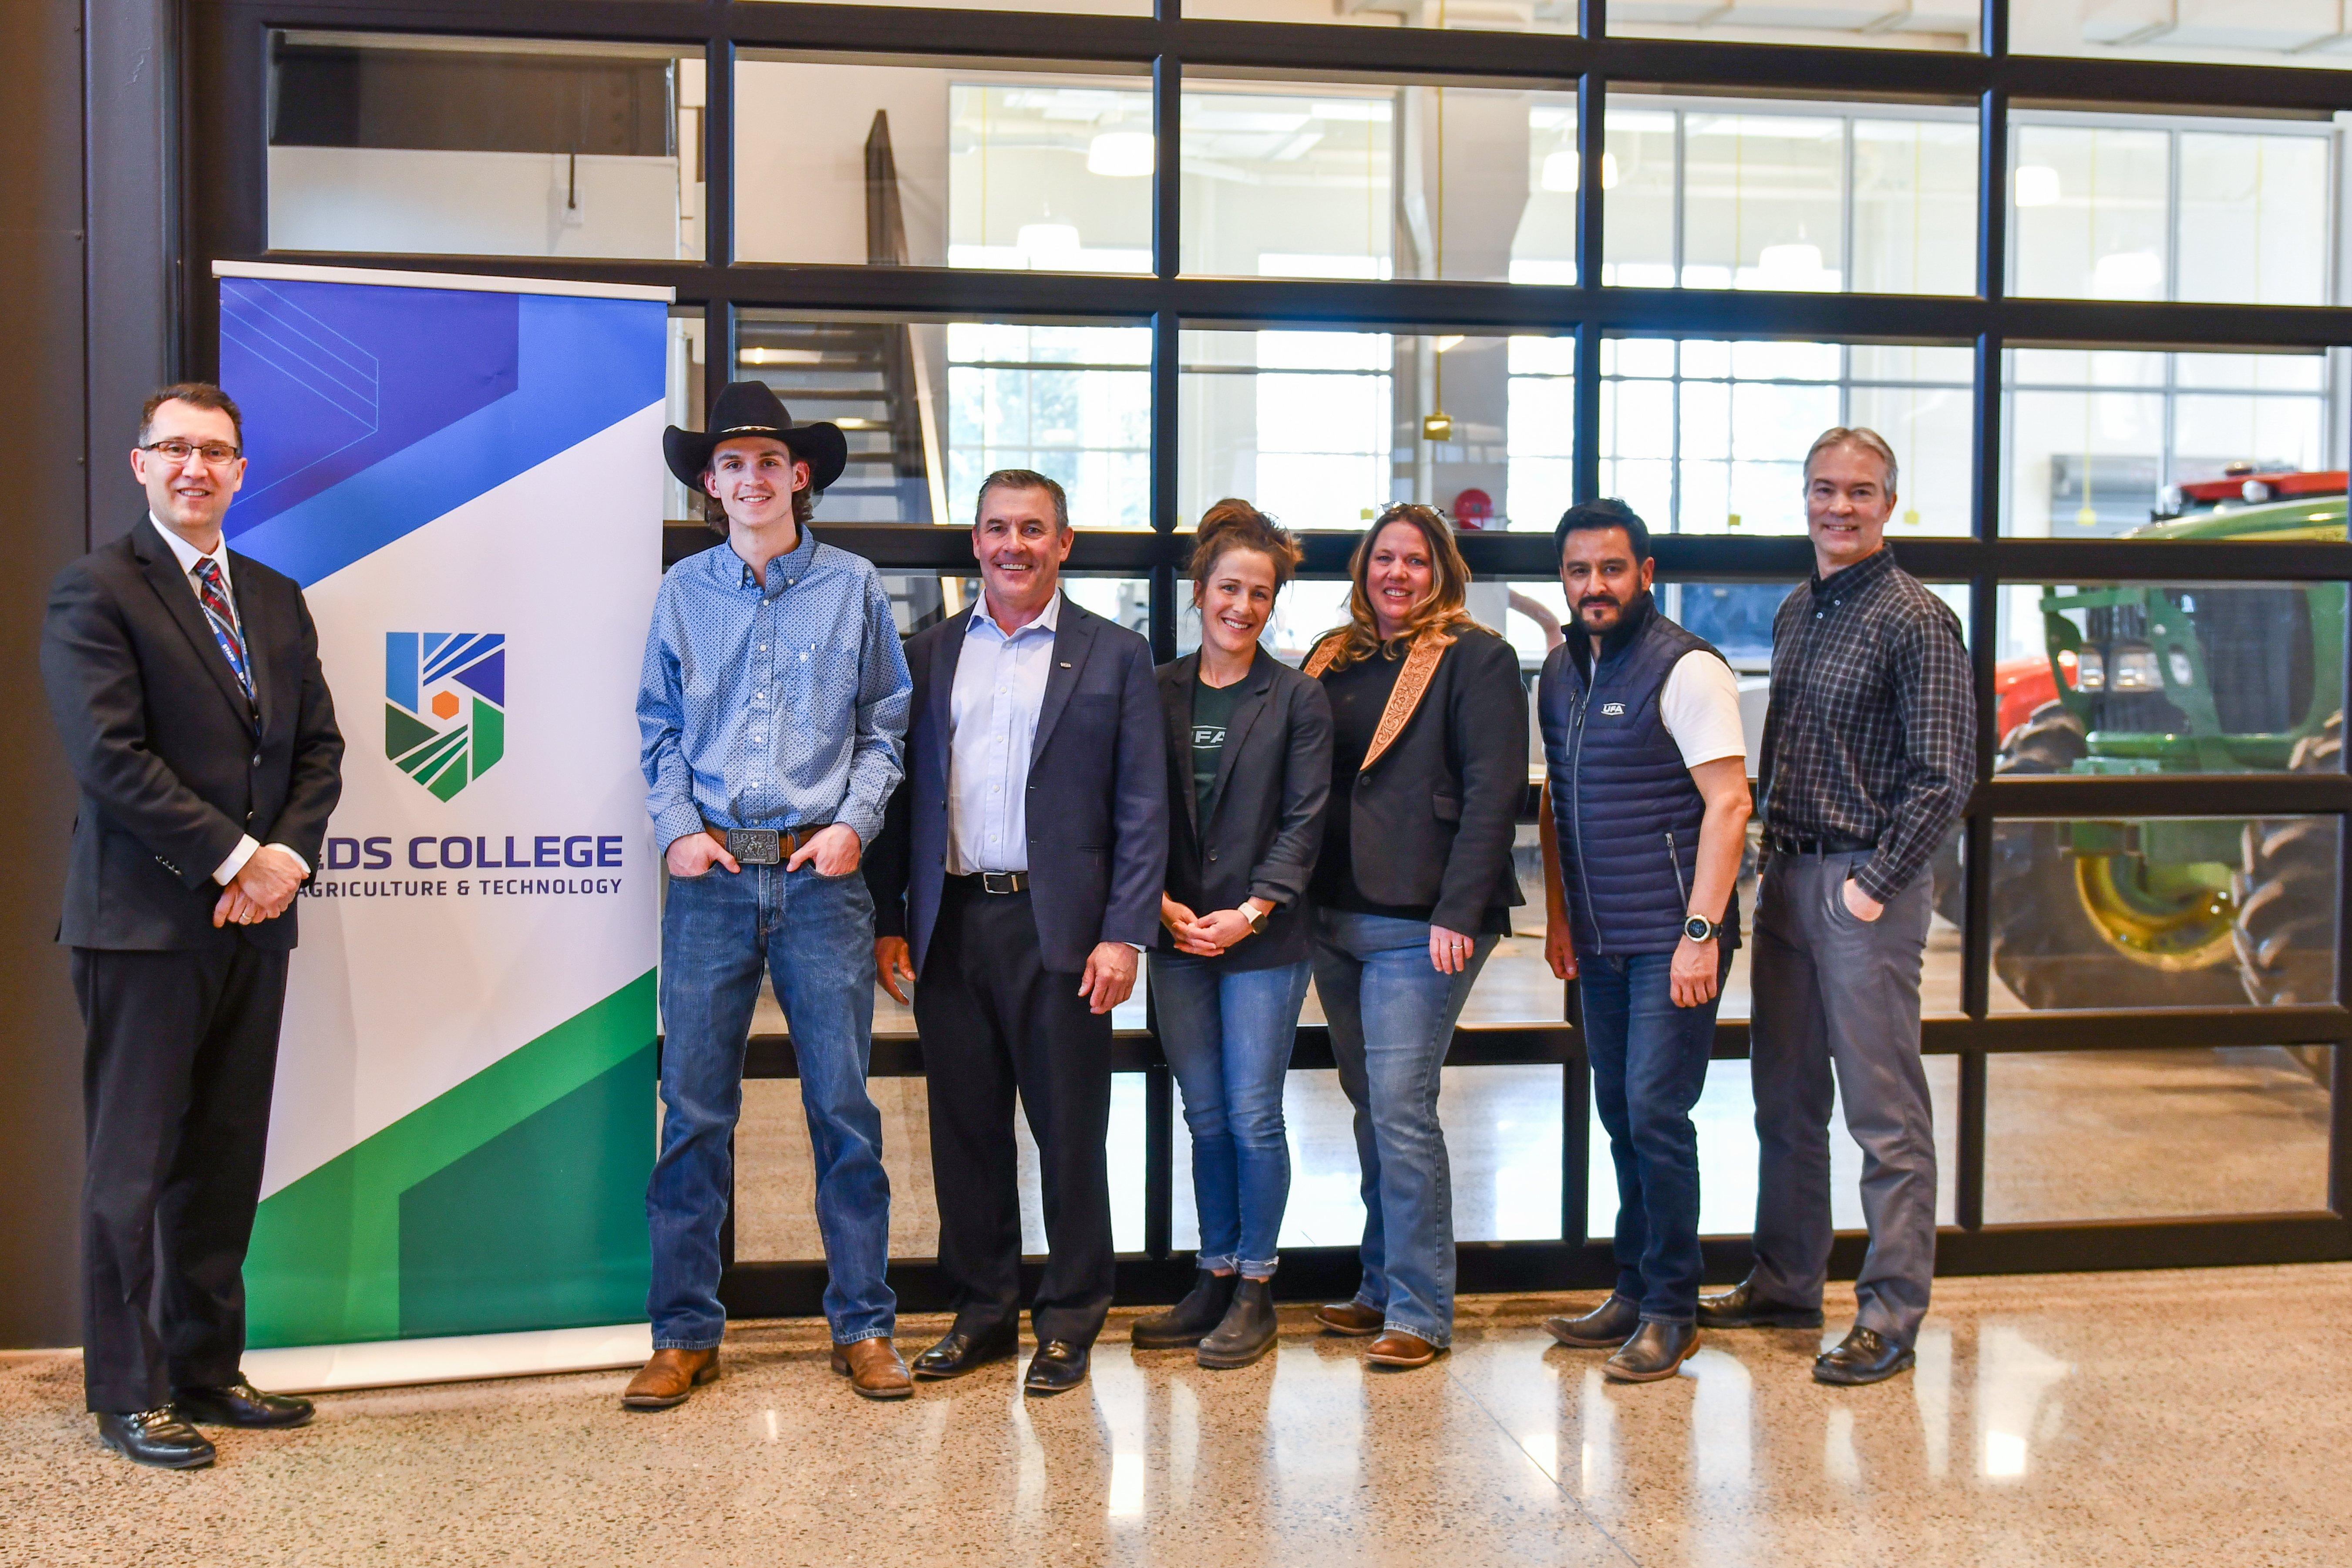 Winner Announced in 2023 UFA Student Pitch Competition with Olds College